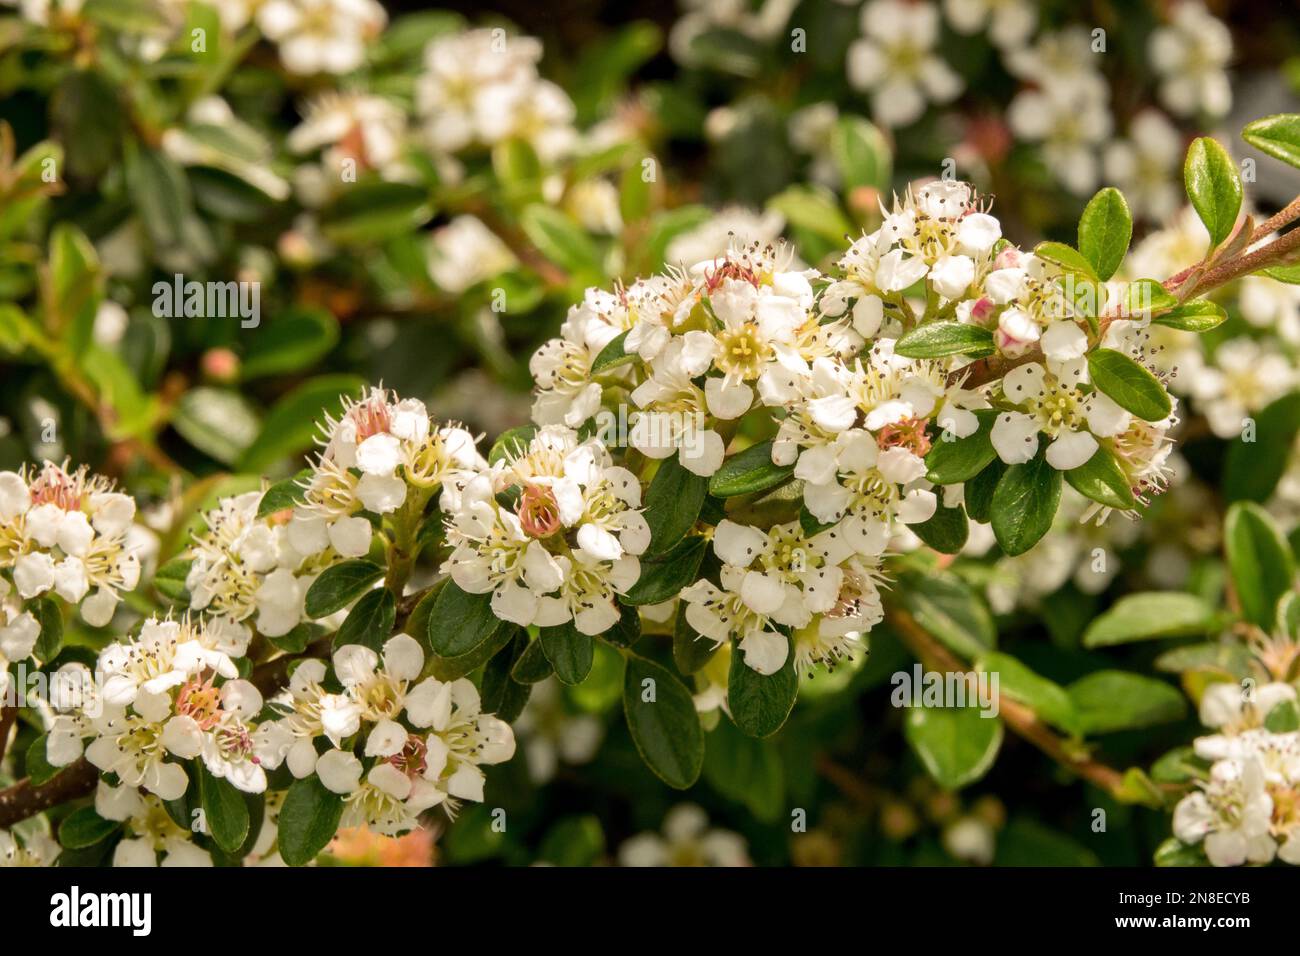 Cotoneaster × suecicus, Cotoneaster, Little Beauty, White, Blooming, Flowers, Blooms, Plant, Flower, Swedish Cotoneaster Stock Photo